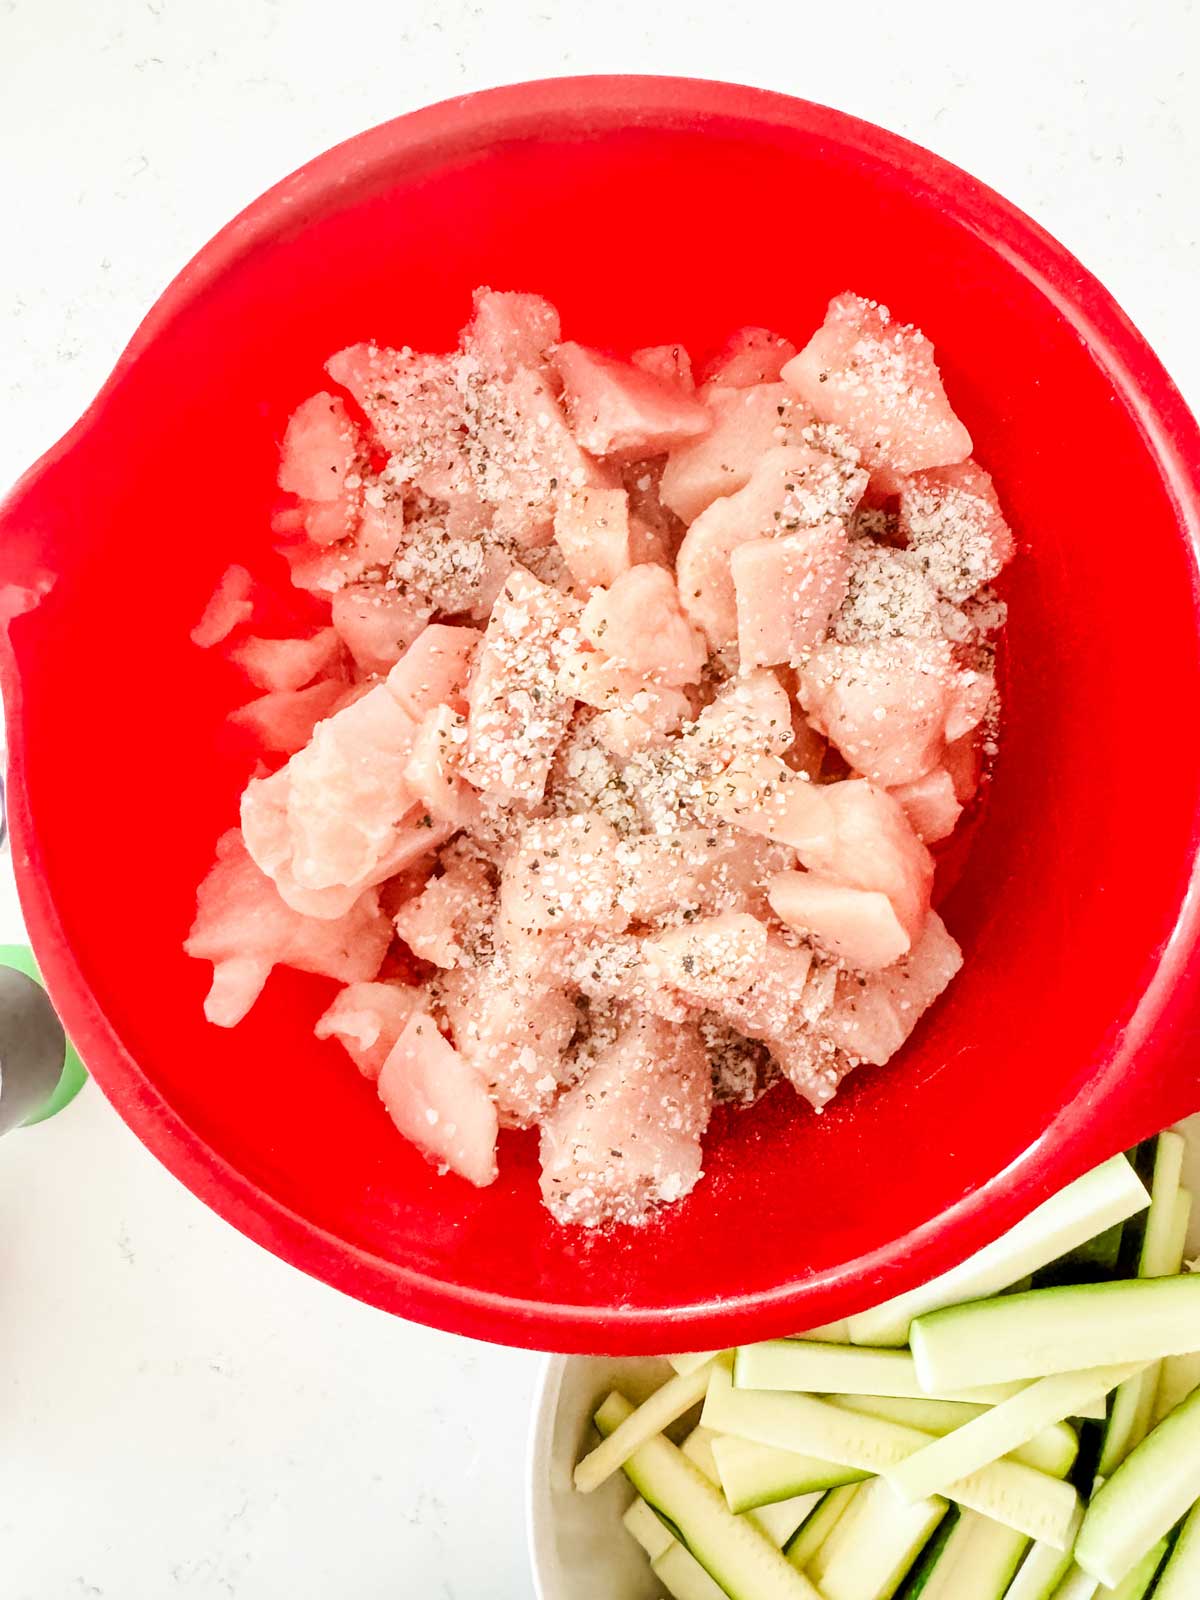 Cubed chicken with seasonings in a red bowl.